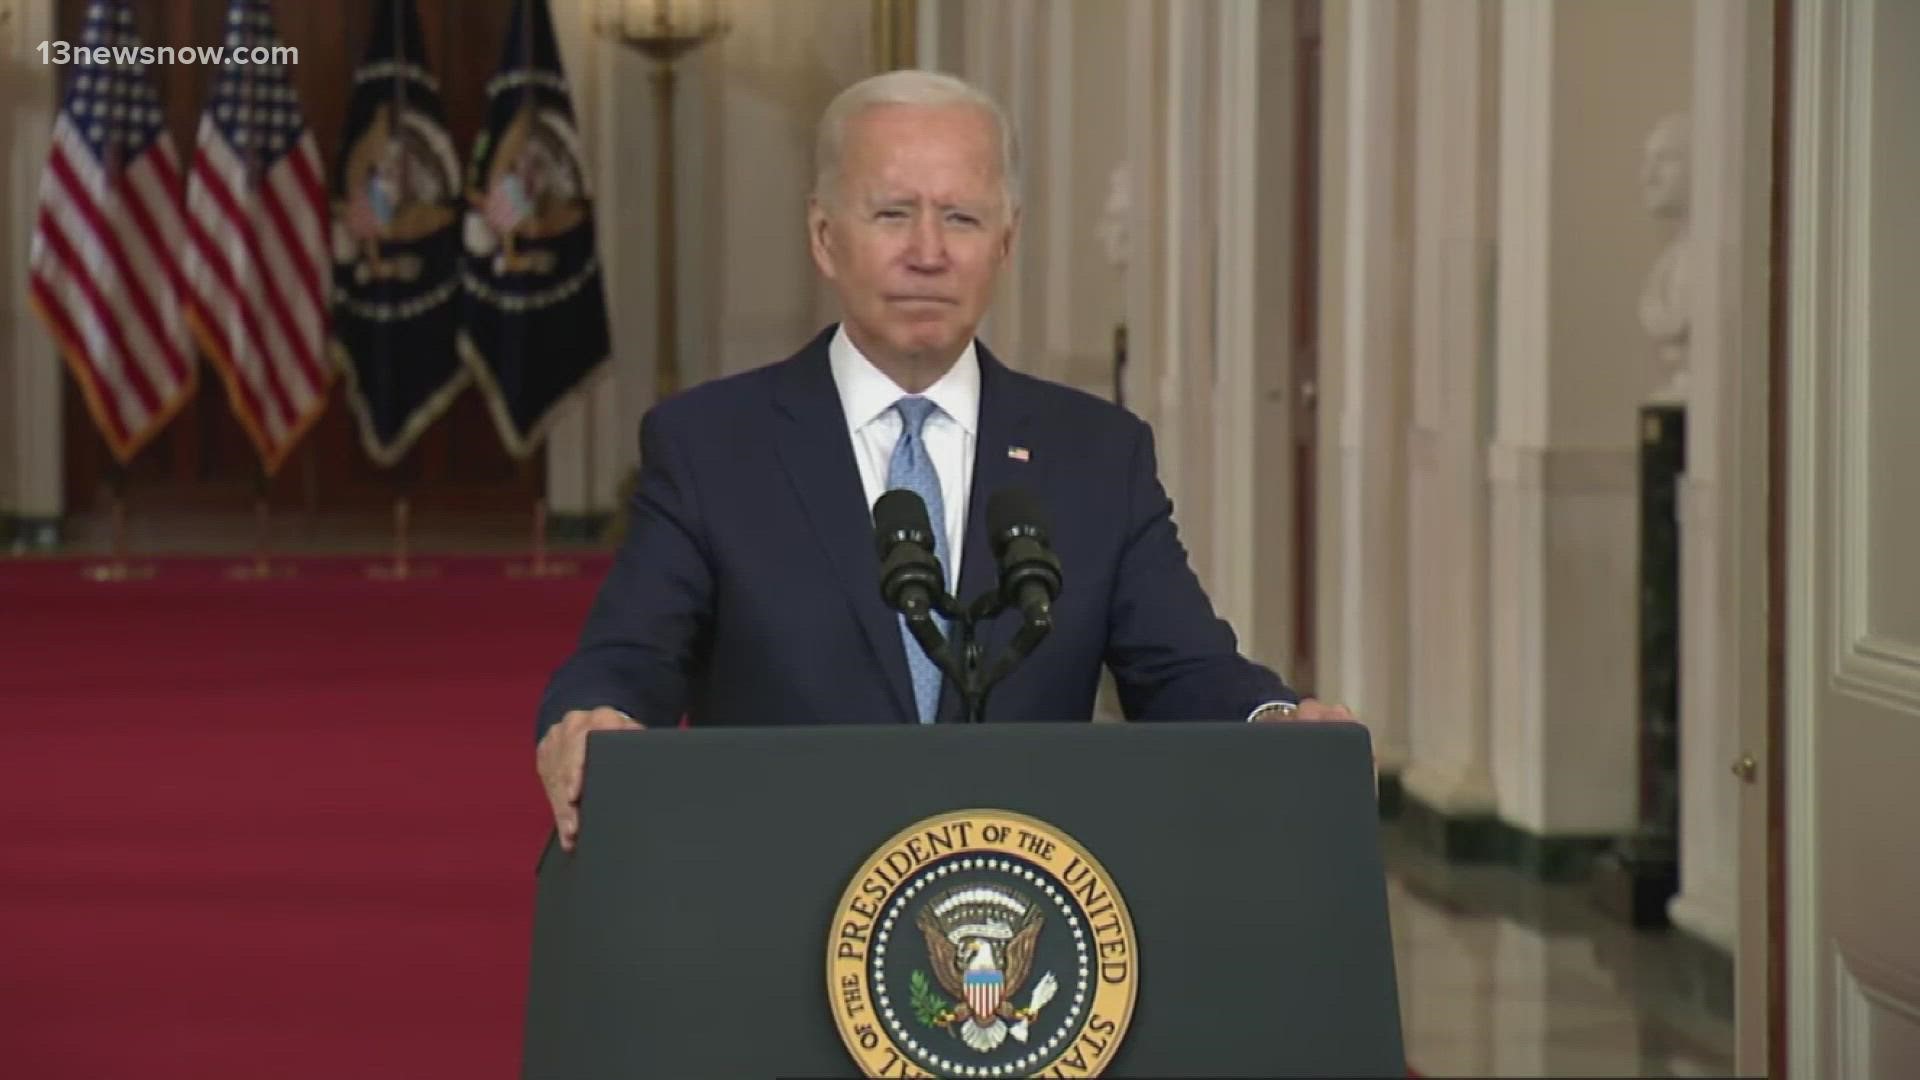 President Biden spoke one day after the war in Afghanistan came to a close.